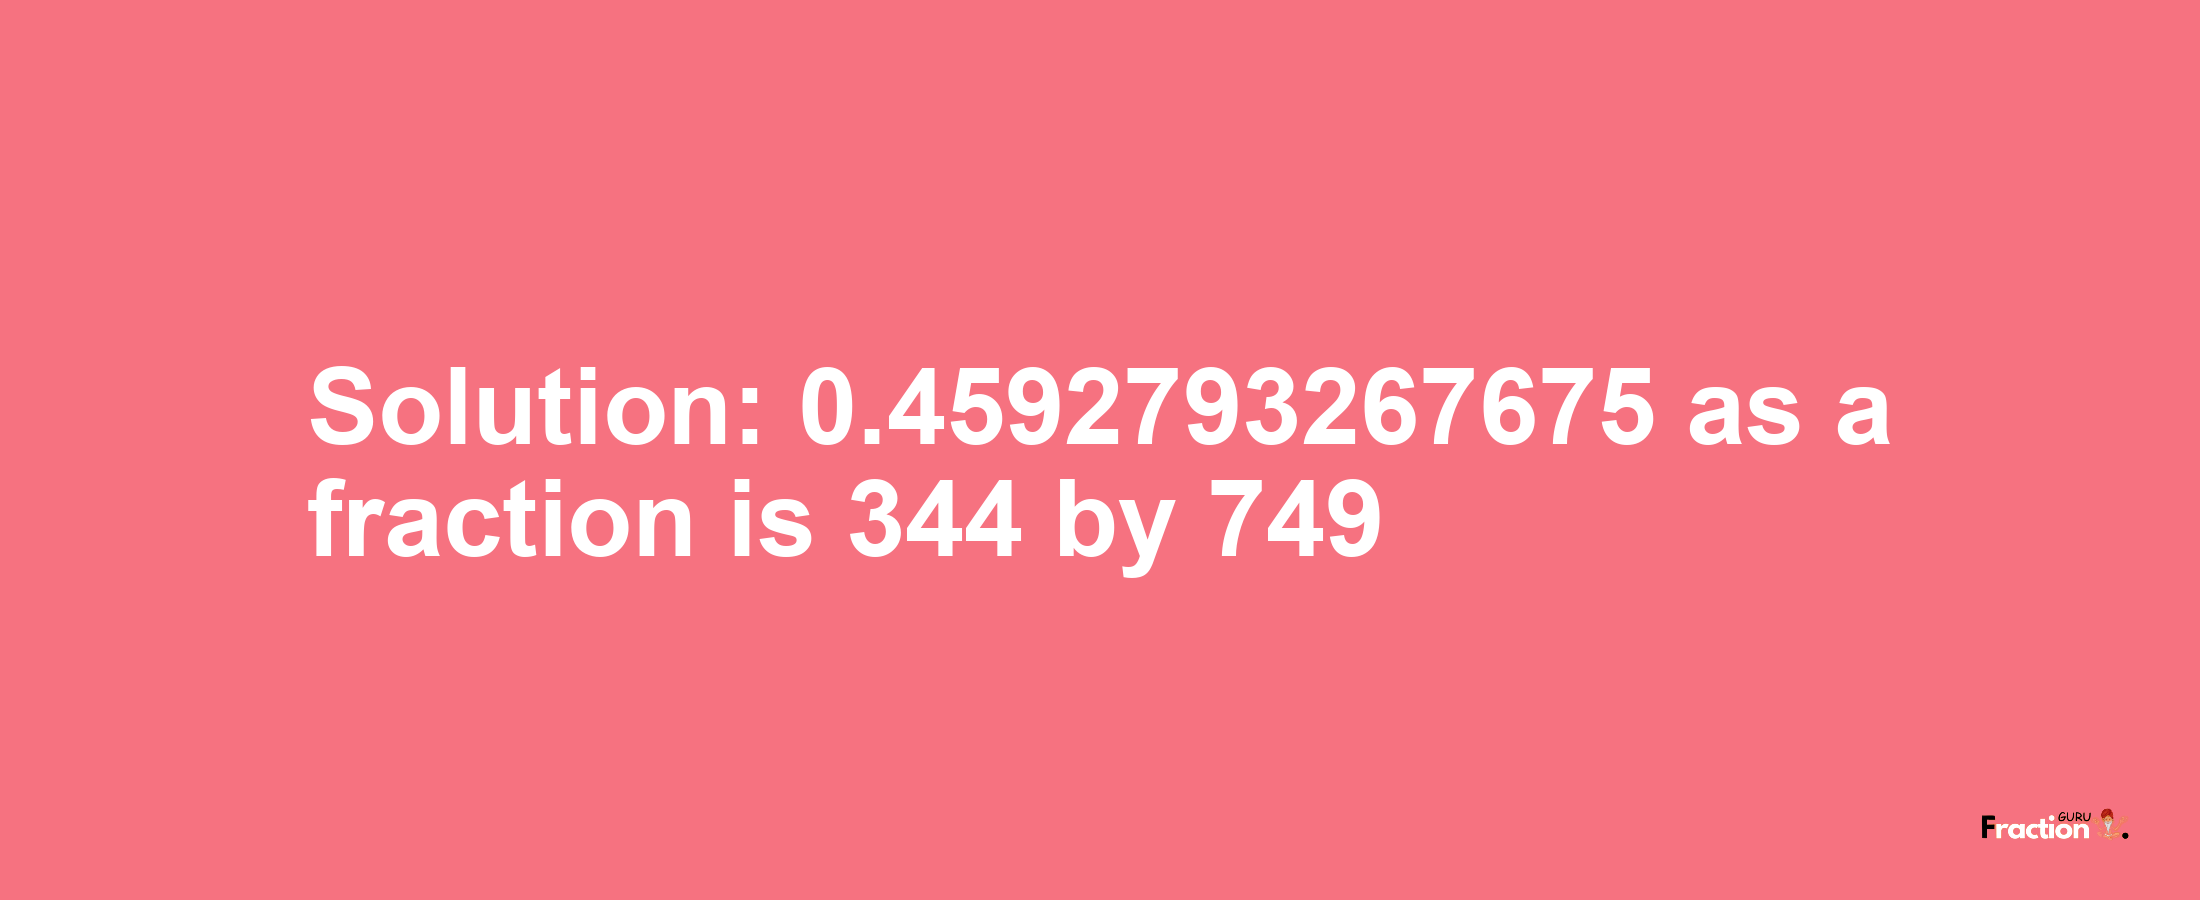 Solution:0.4592793267675 as a fraction is 344/749